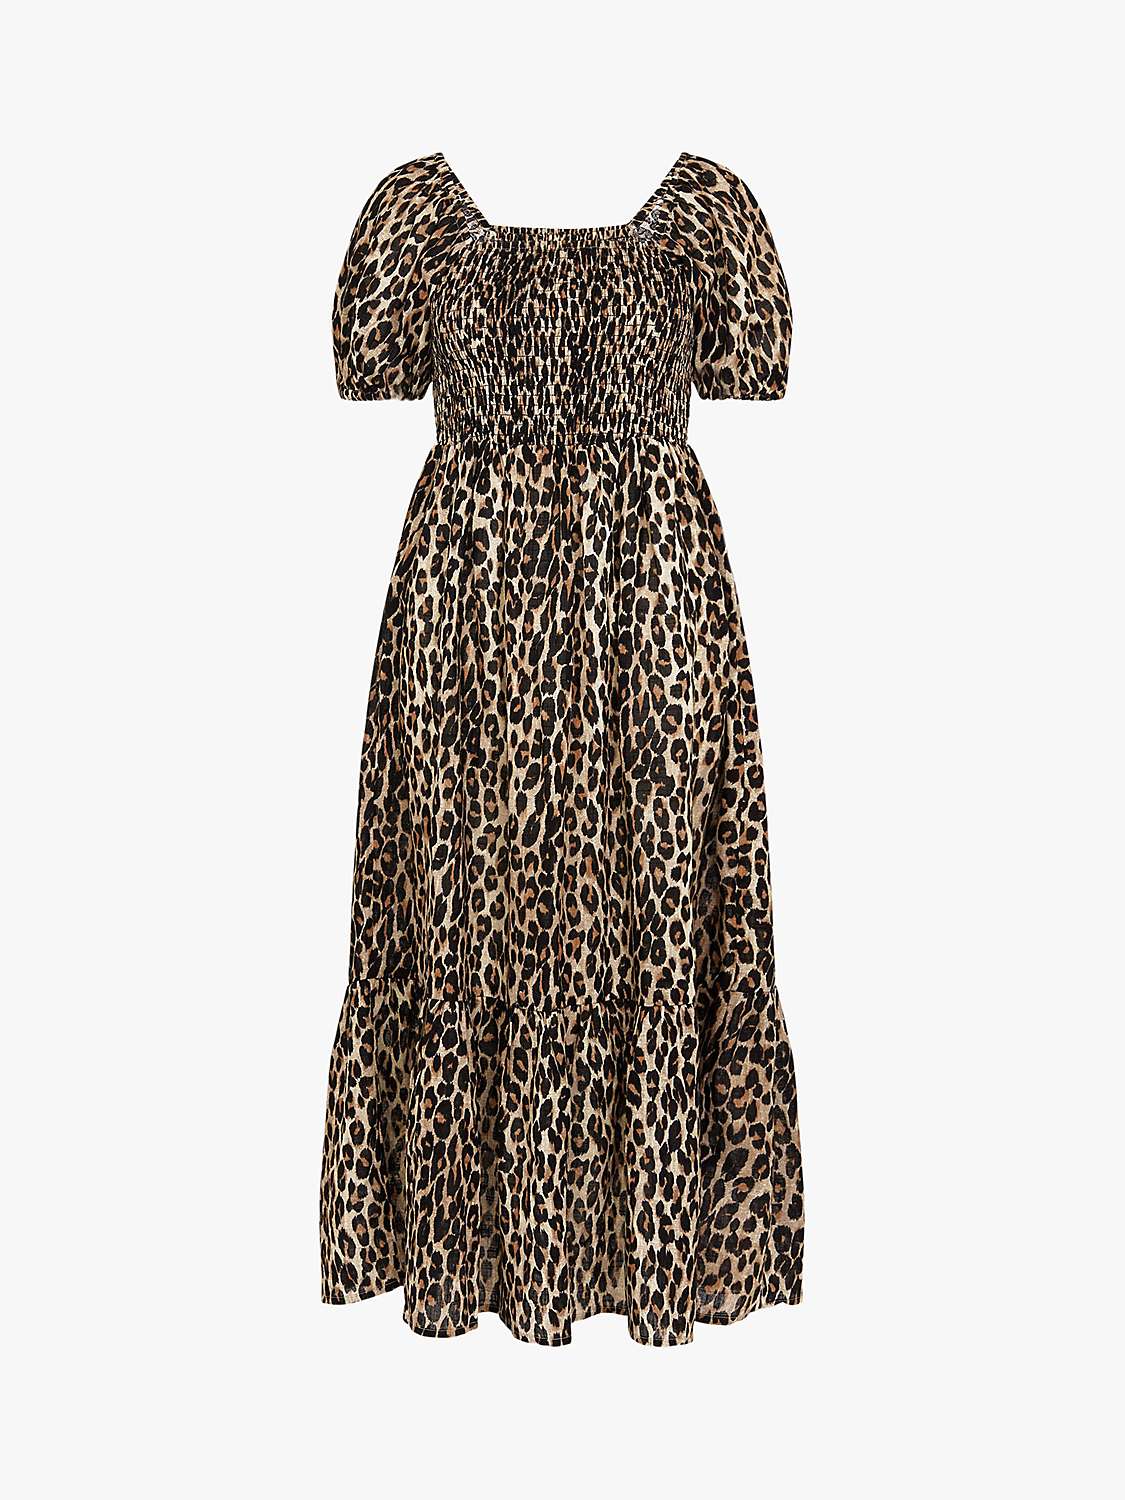 Buy Accessorize Leopard Print Puff Sleeve Dress, Mid Brown Online at johnlewis.com